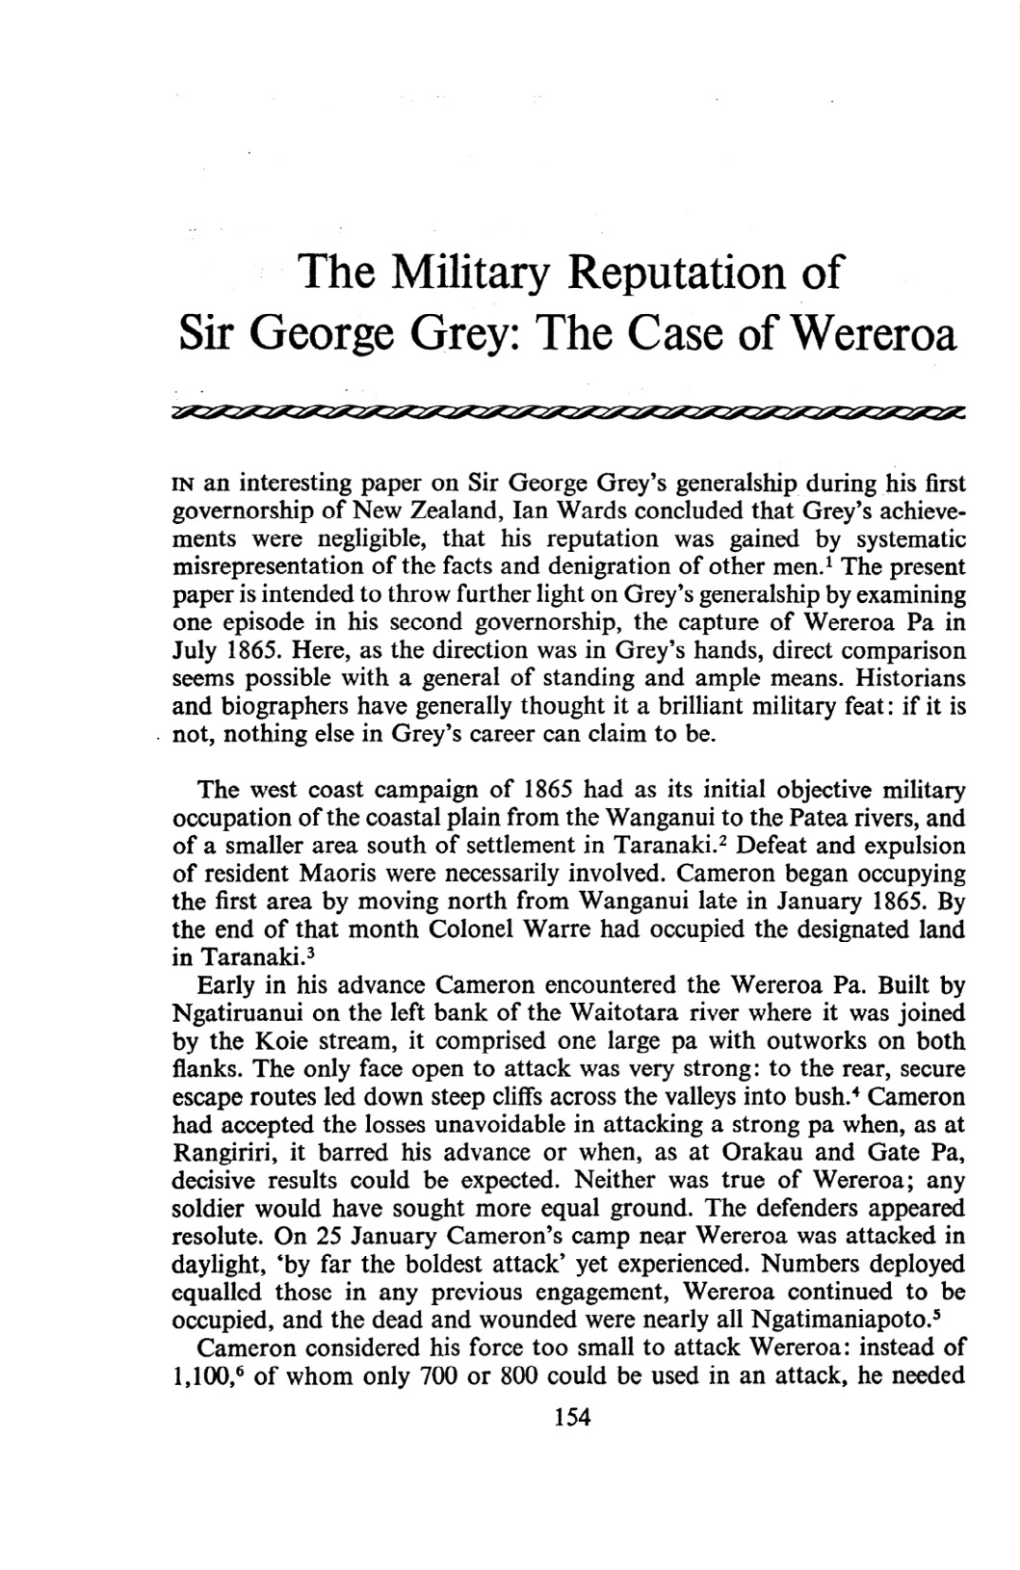 The Military Reputation of Sir George Grey: the Case of Wereroa